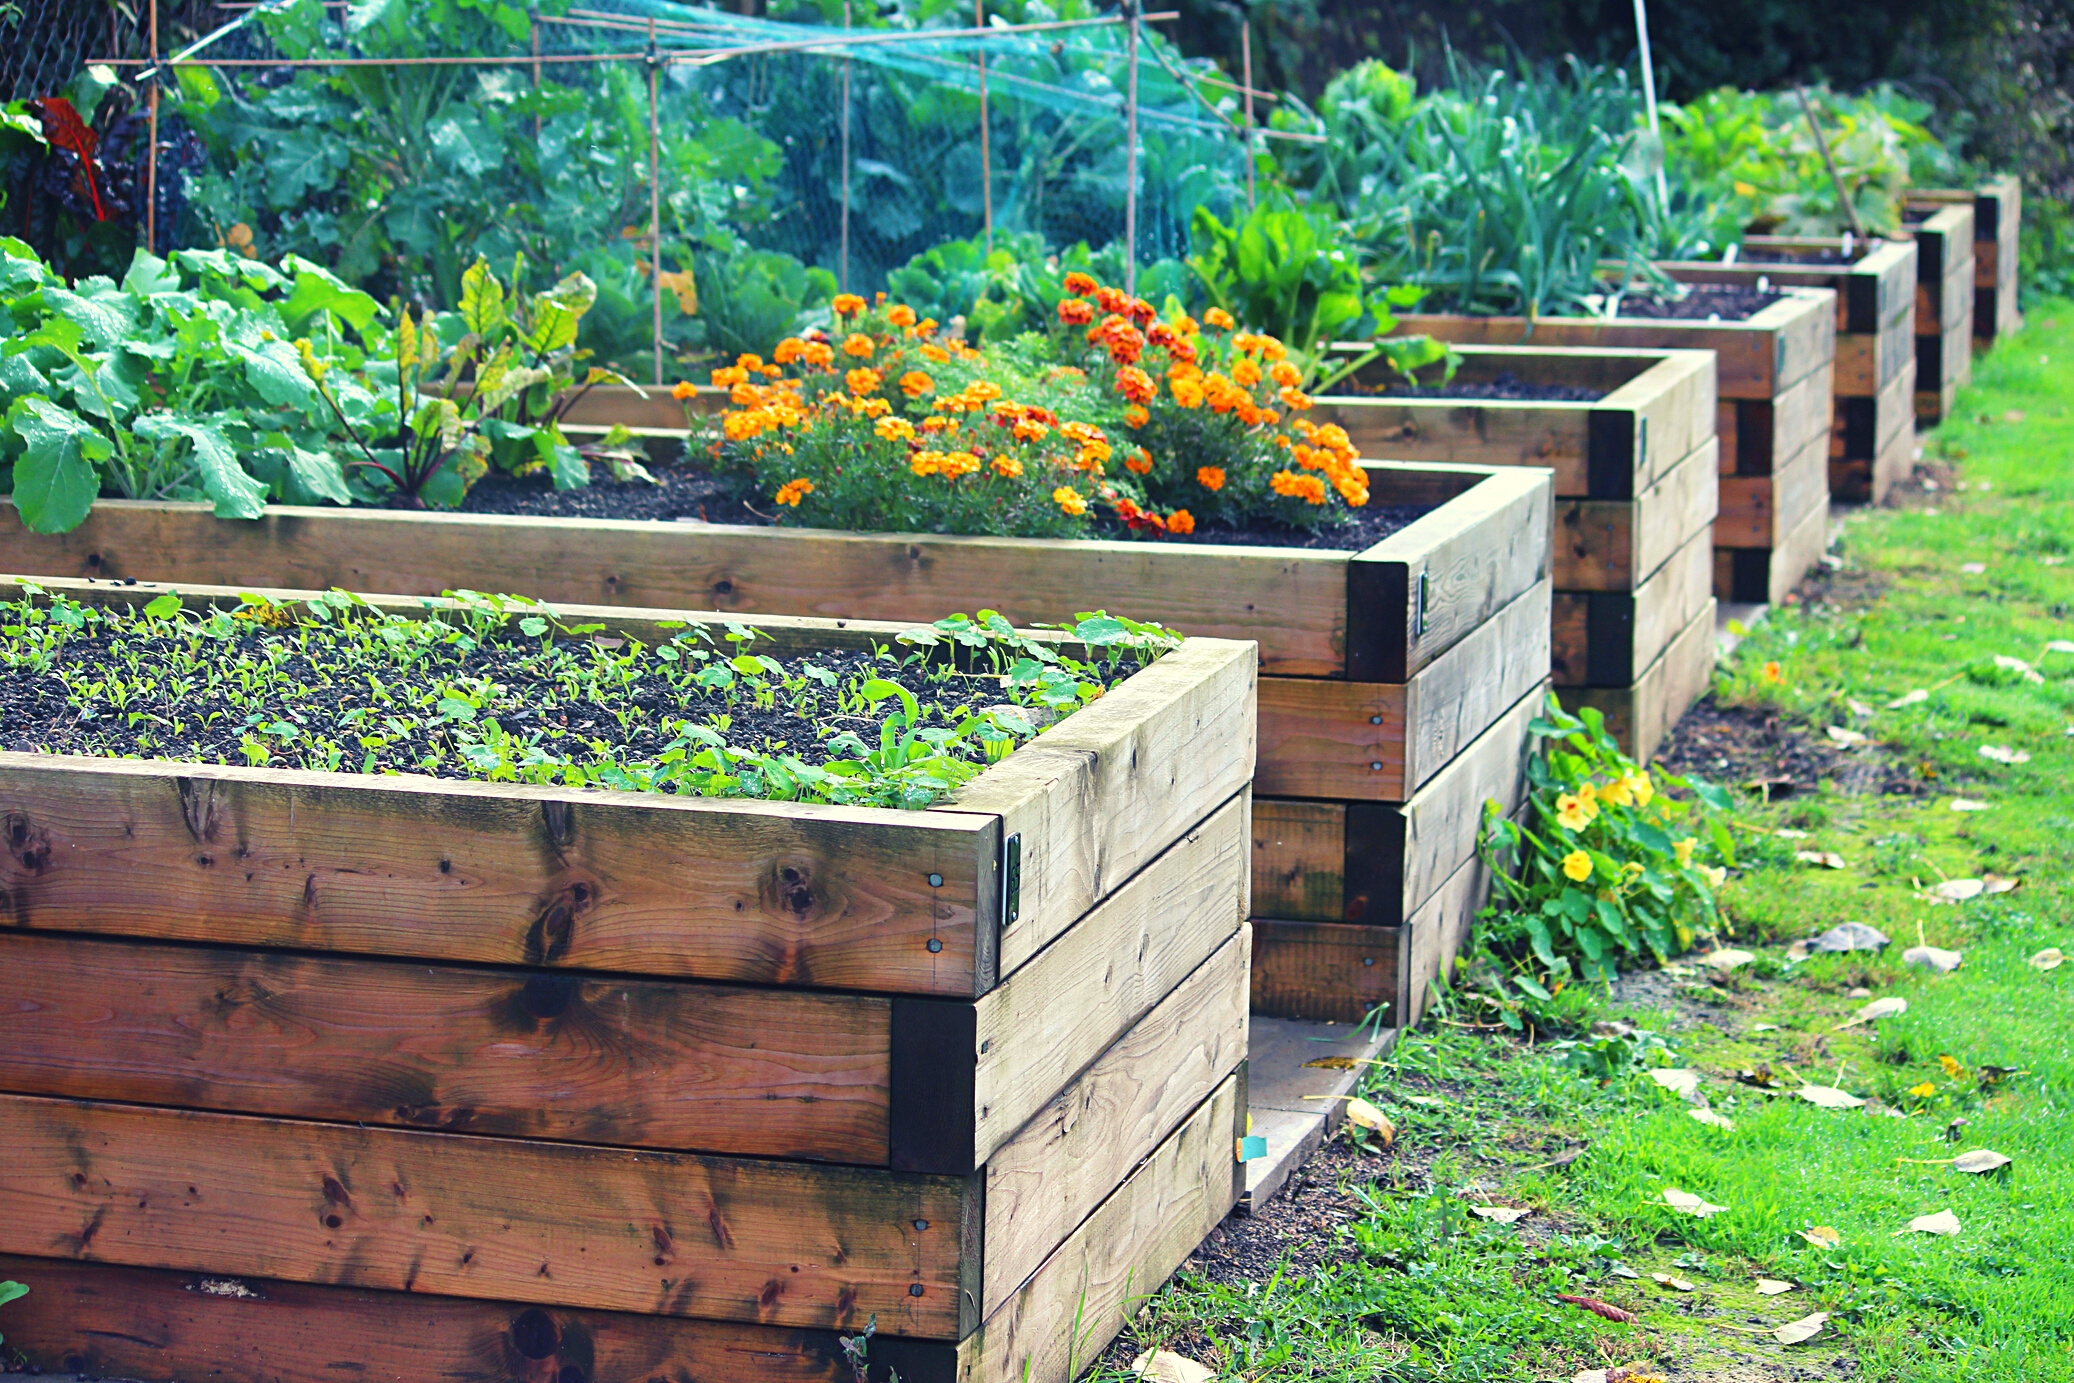 Image of wooden raised beds in allotment vegetable garden, timber